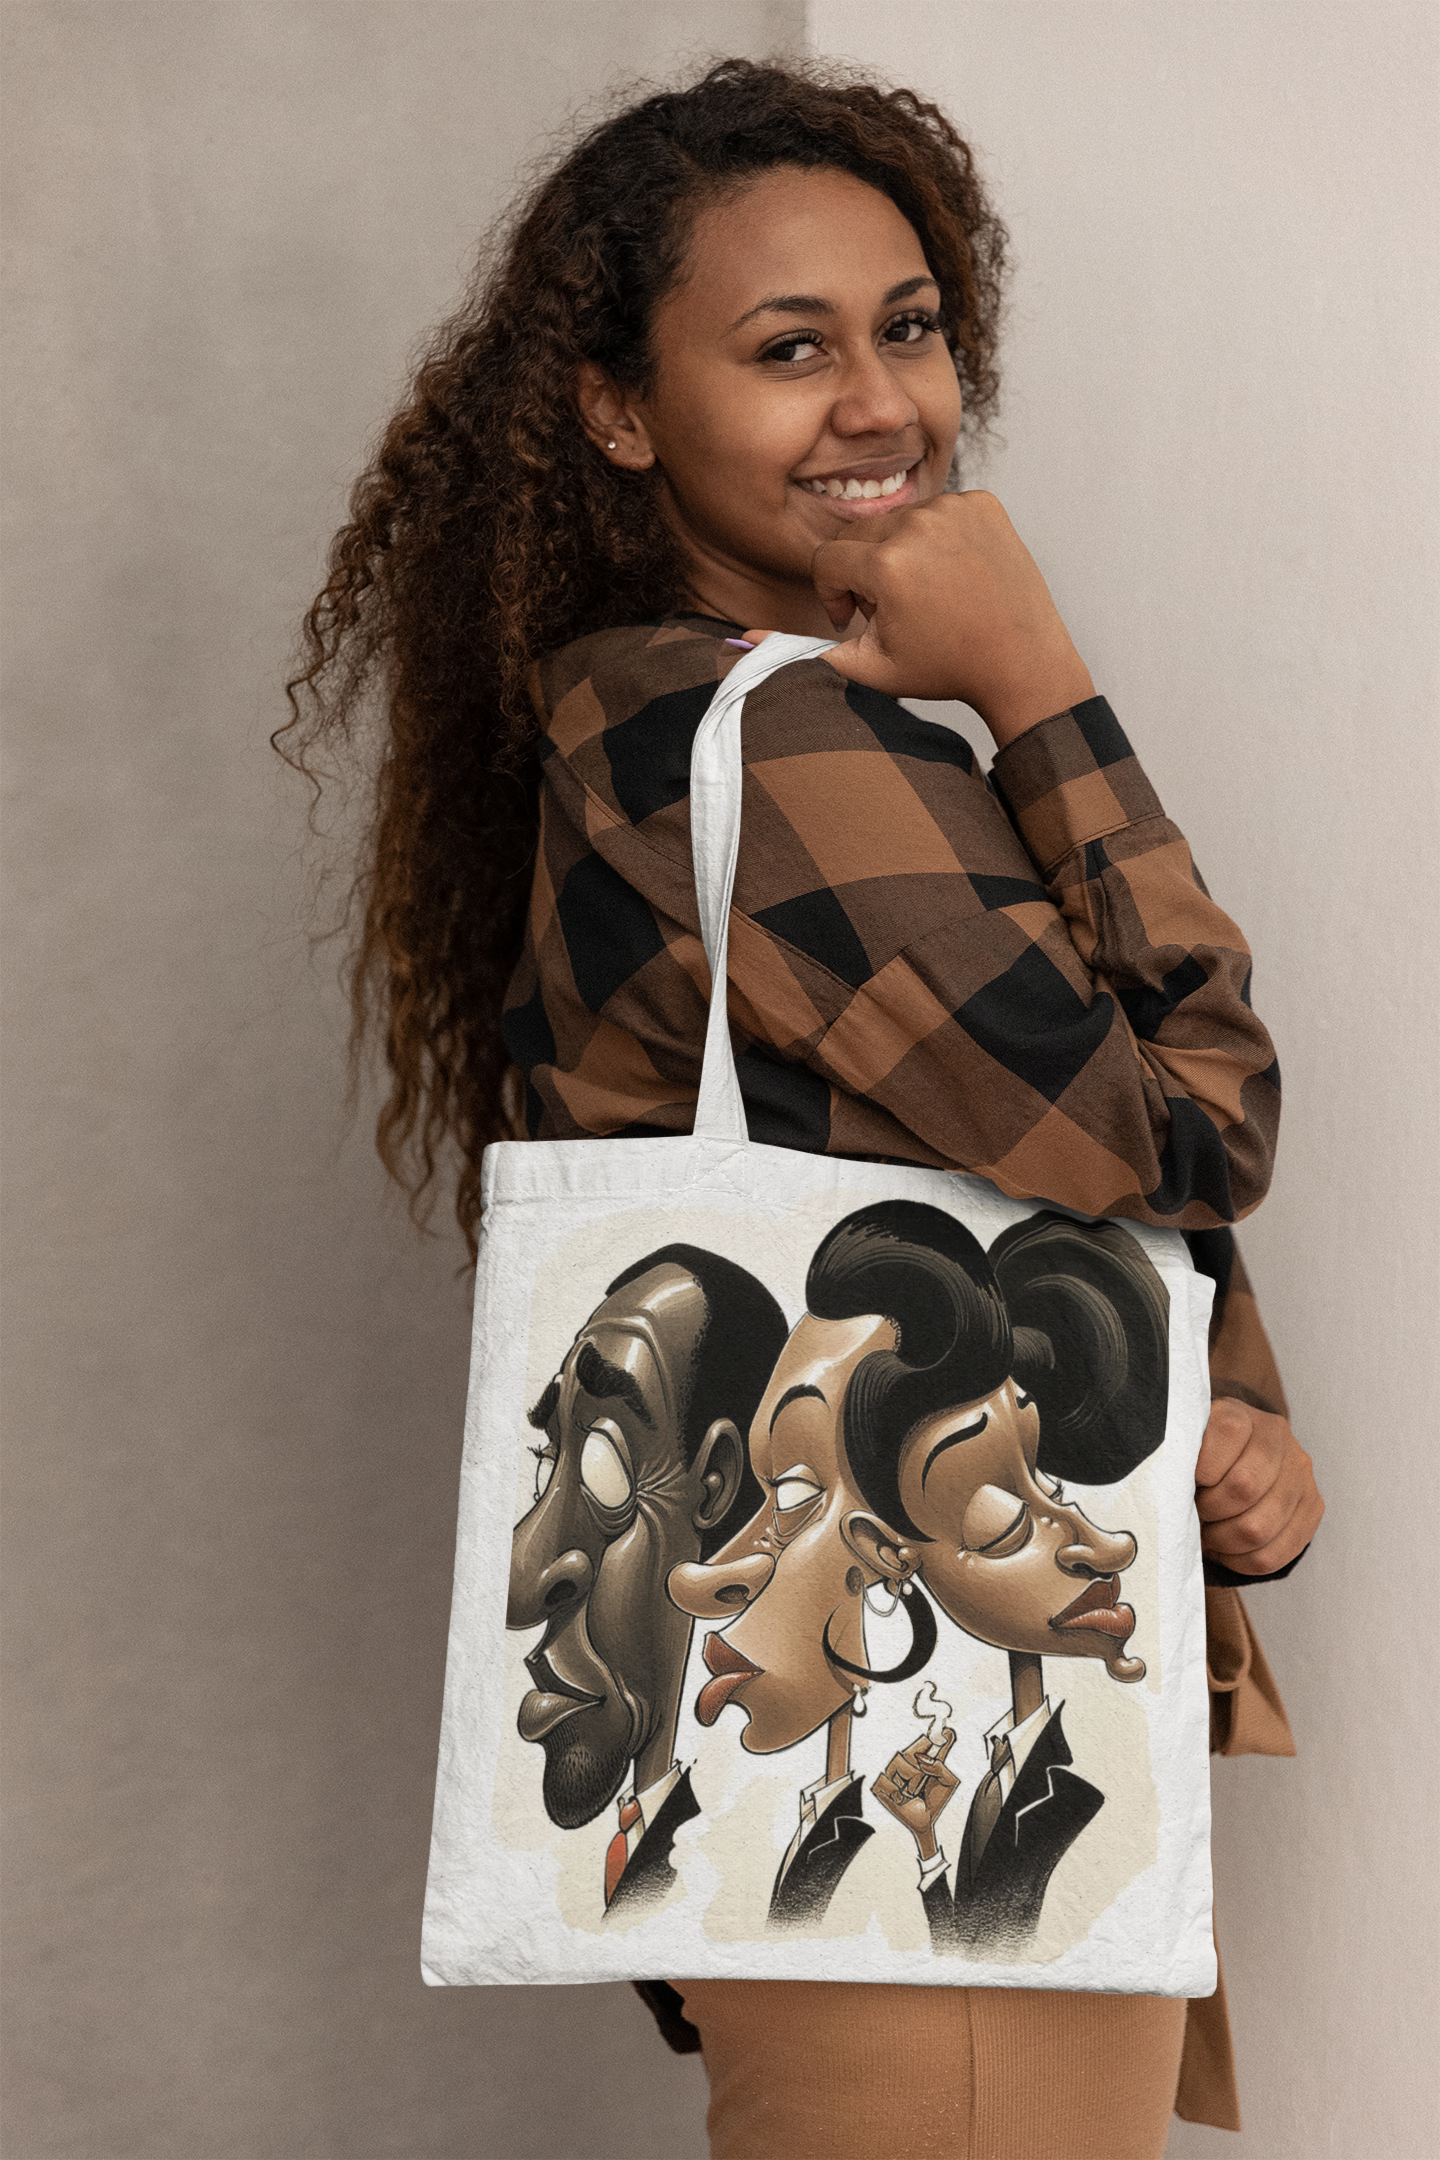 "JUS BOUGIE" - AFRICAN AMERICAN THEMED Tote Bag